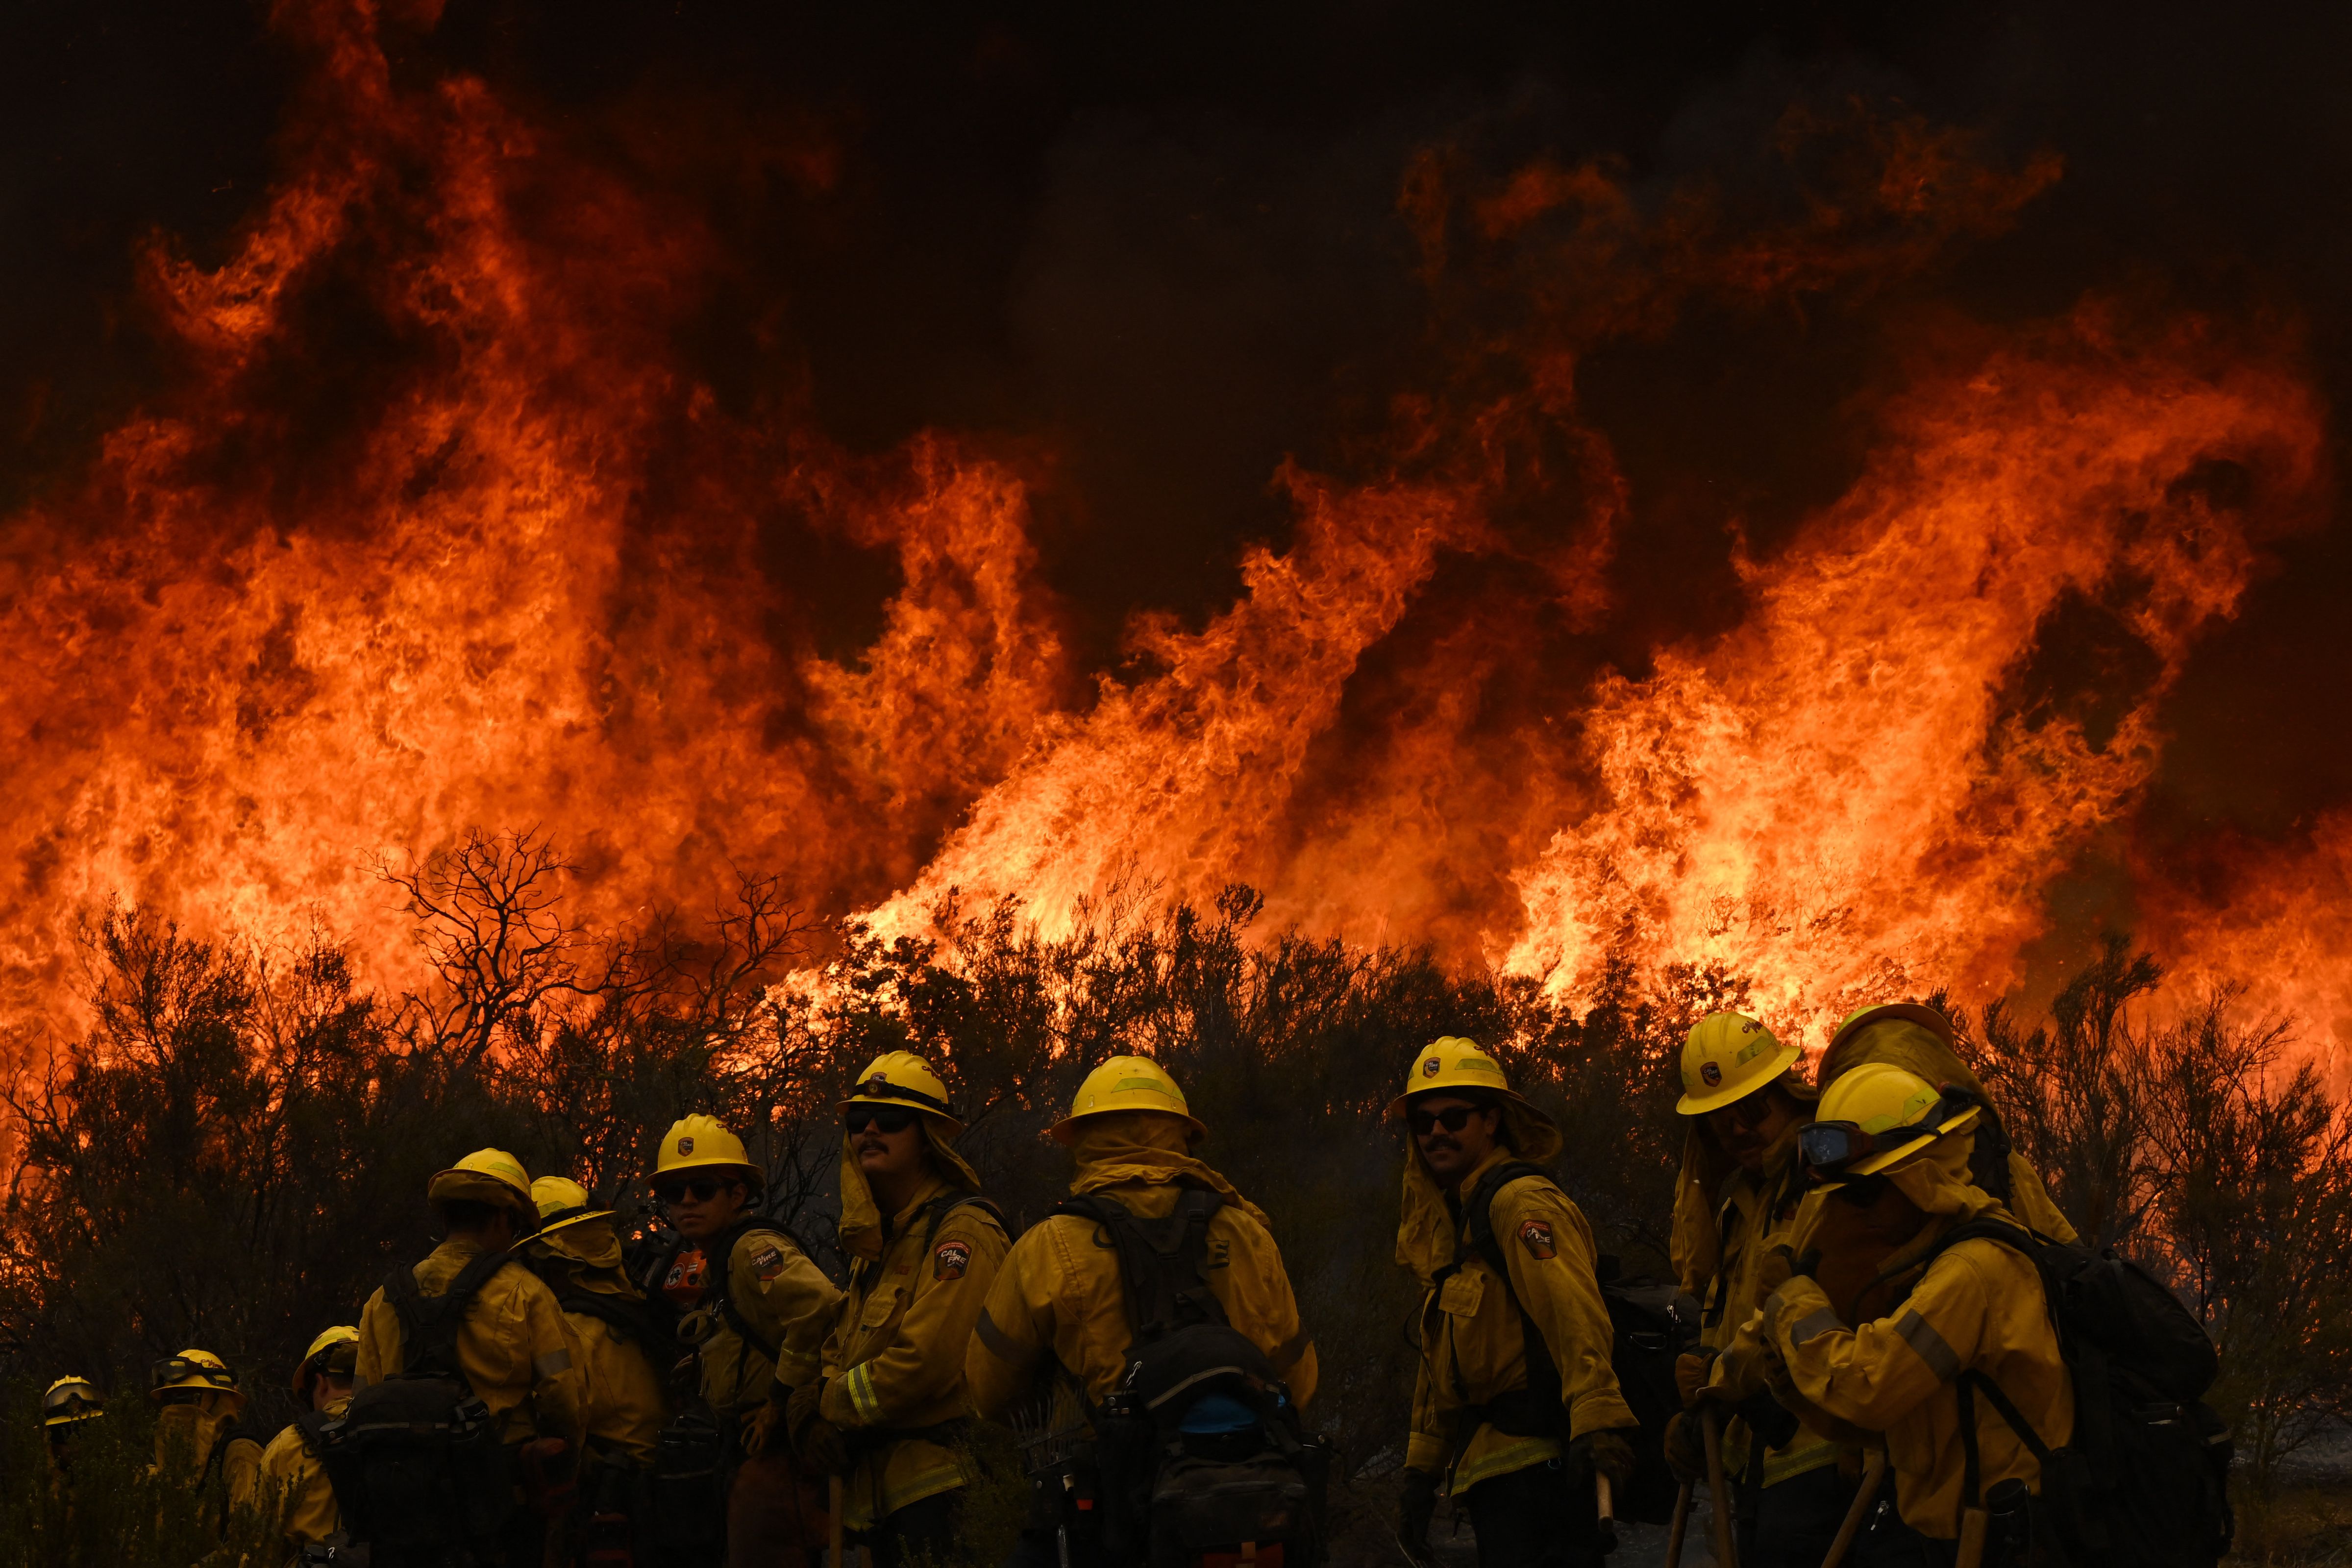 Firefighters turn away to watch for any stray embers during a firing operation to build a line to contain the Fairview Fire near Hemet, California, US